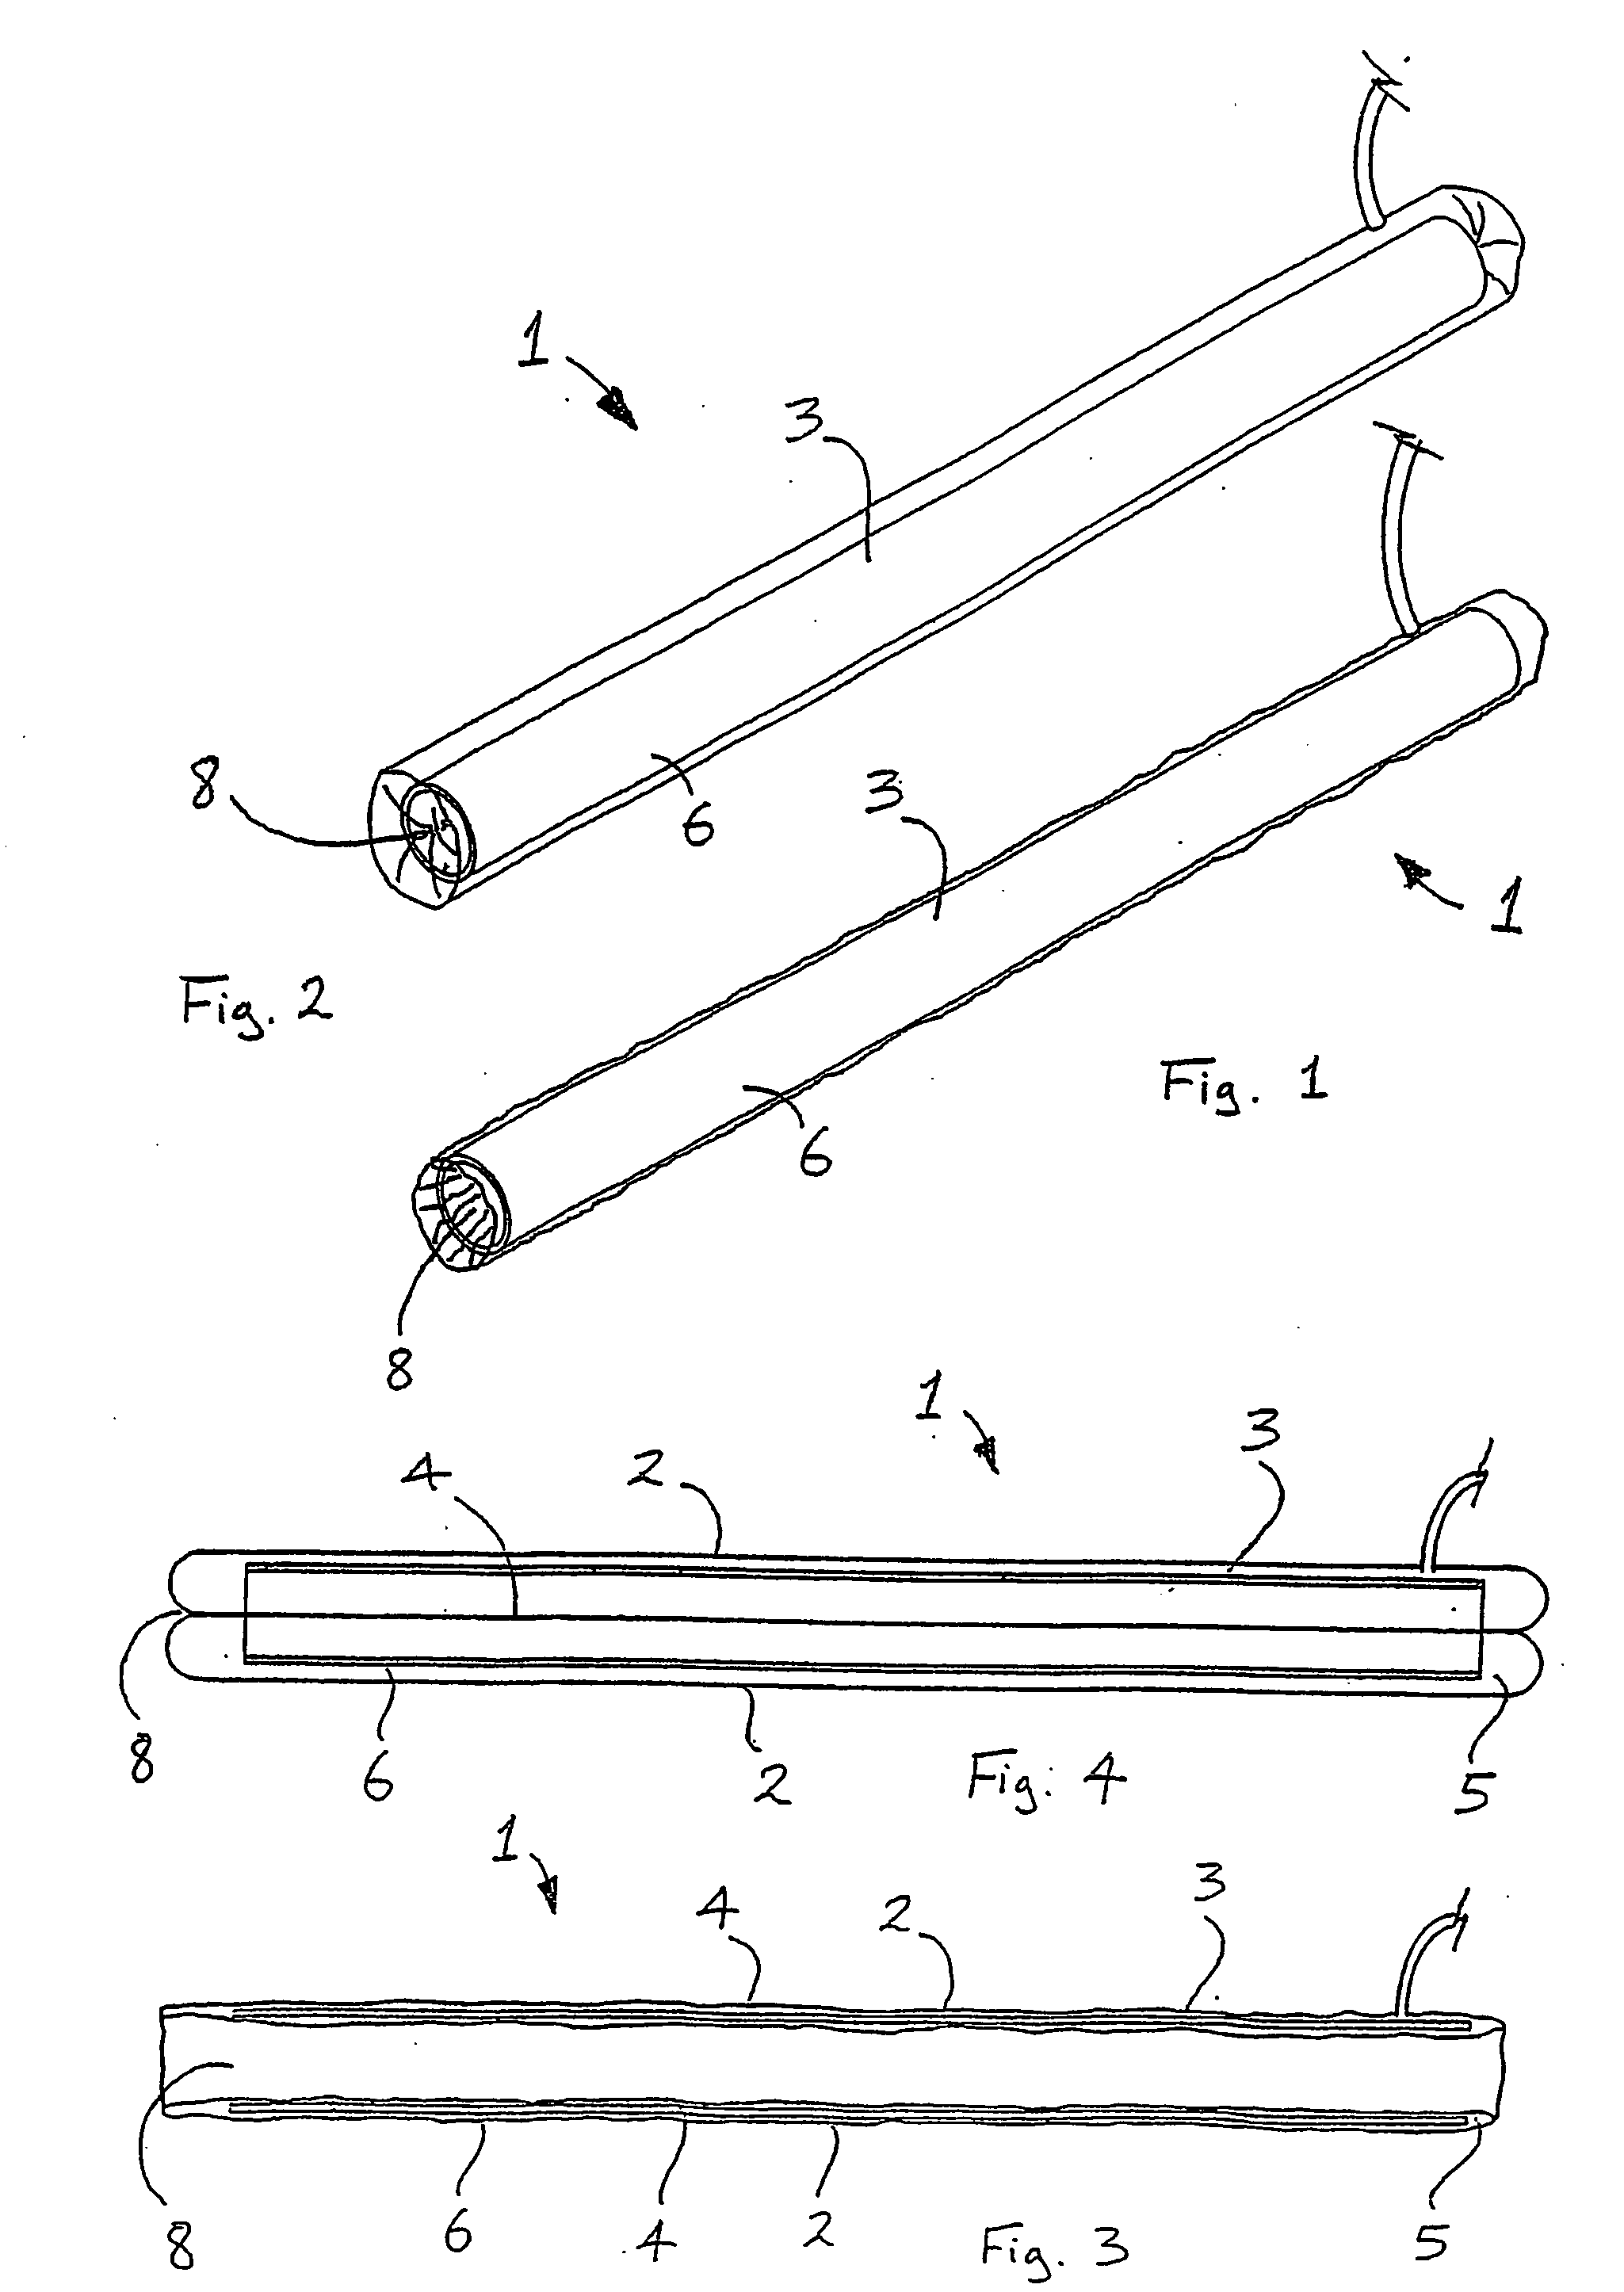 Evertable insertion tube for colonoscope